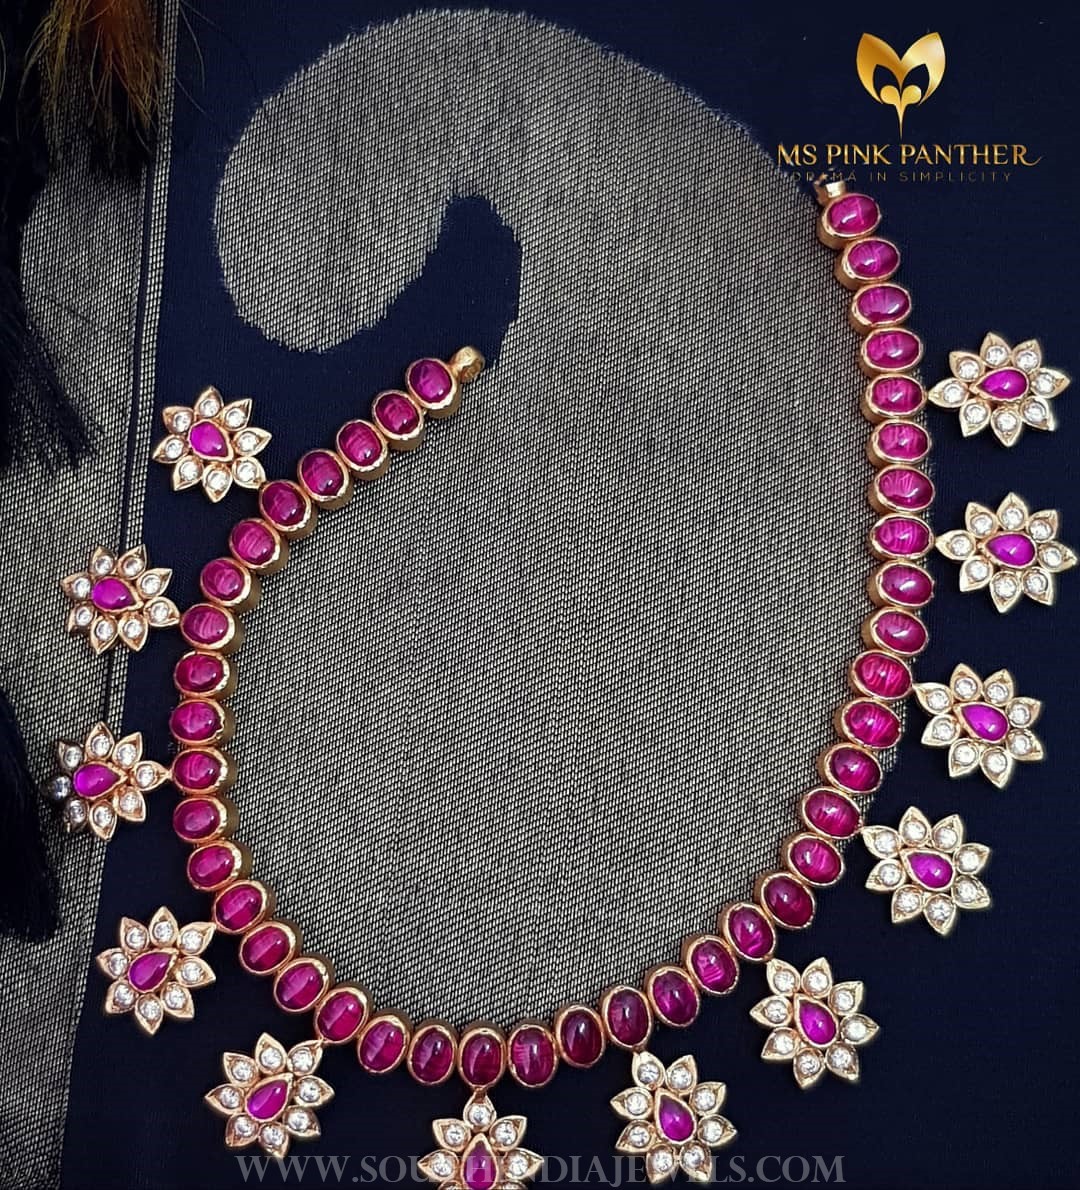 Antique Ruby Floral Necklace From Ms Pink Panthers